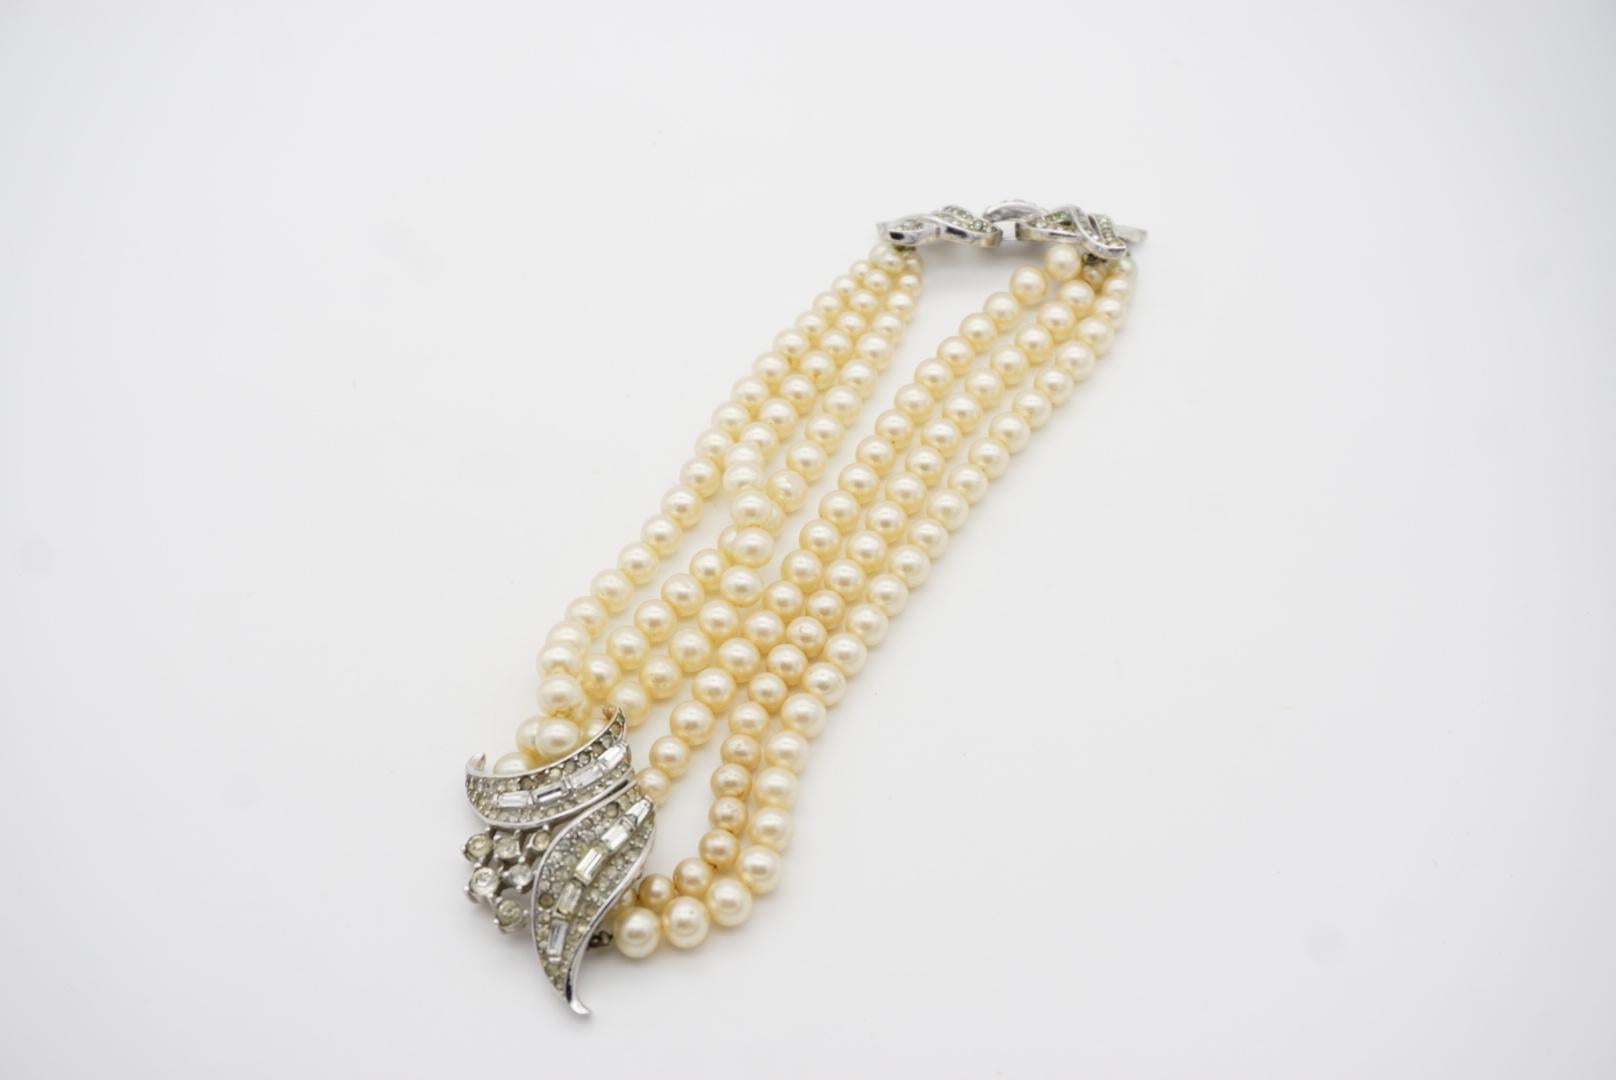 Crown Trifari 1940s Trio Strands Layer Pearls Crystals Pendant Choker Necklace For Sale 6